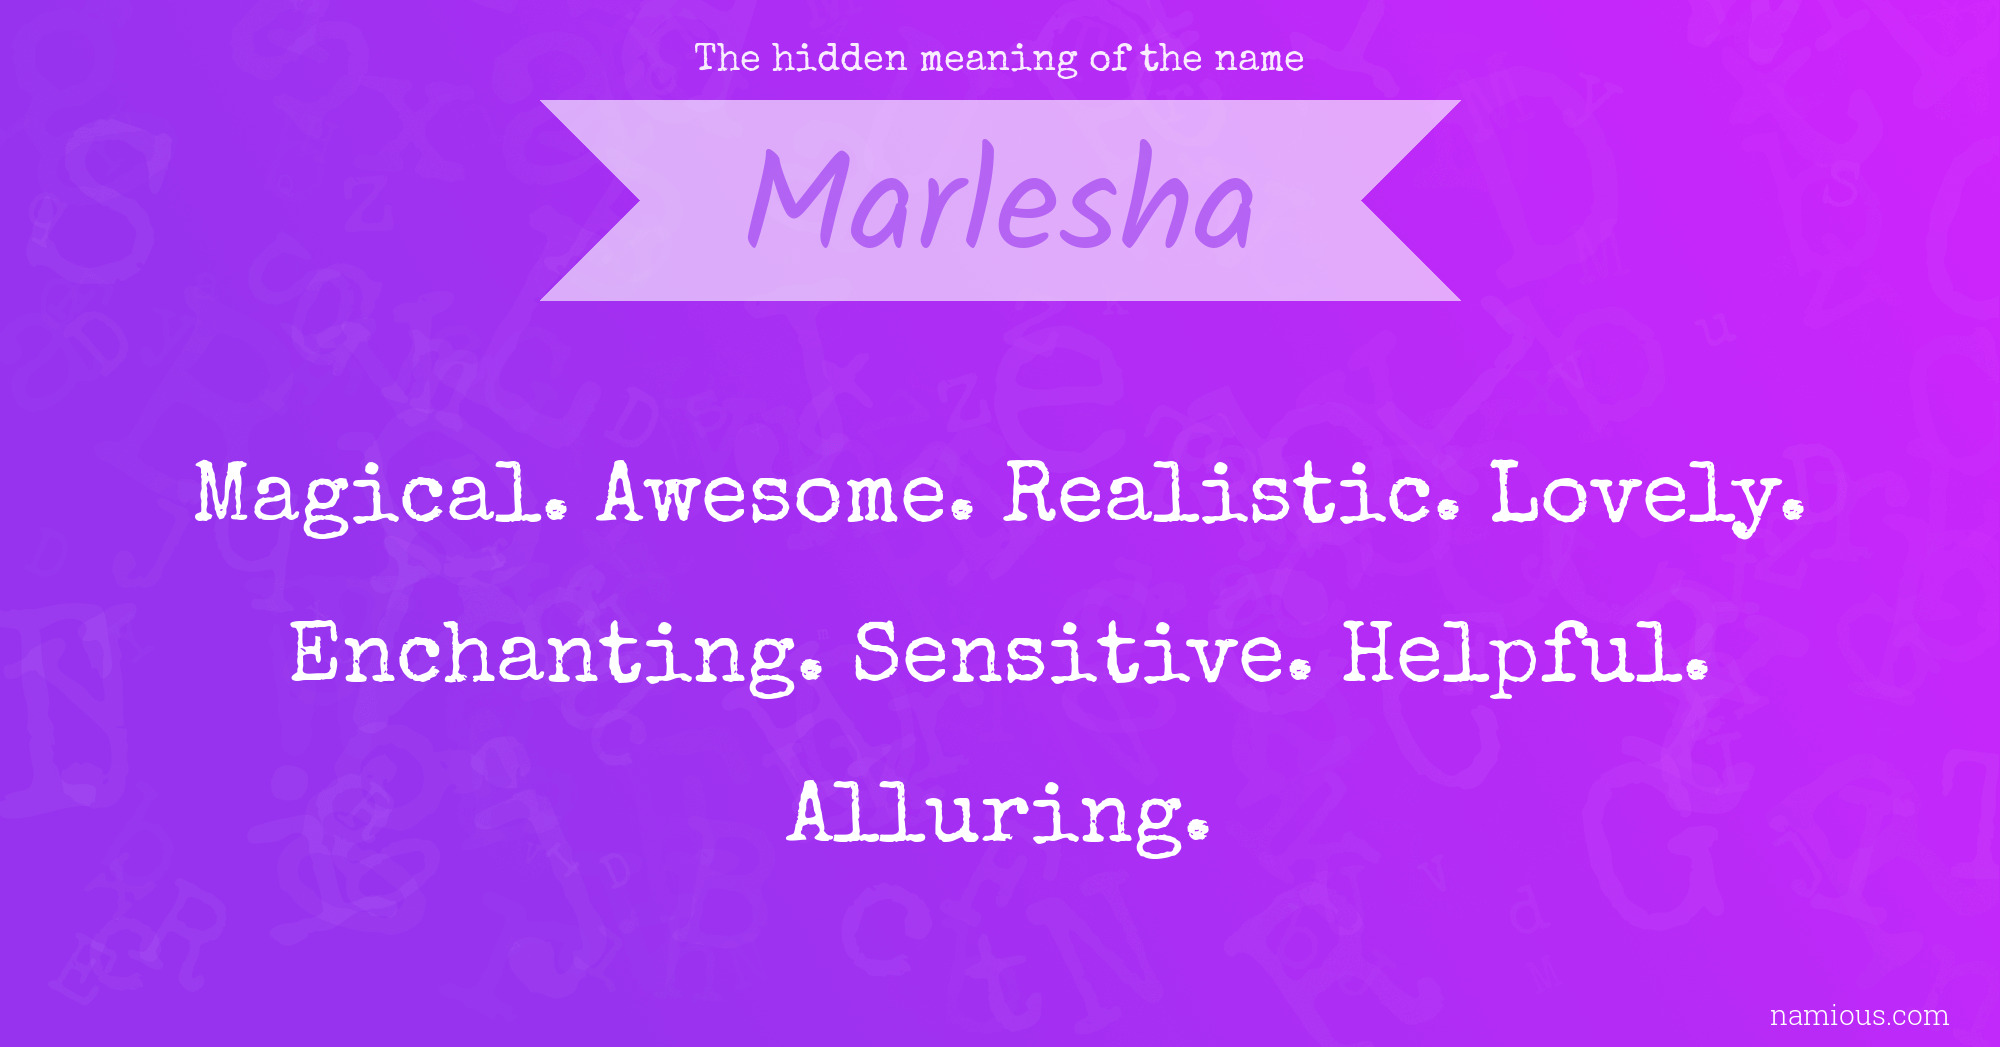 The hidden meaning of the name Marlesha